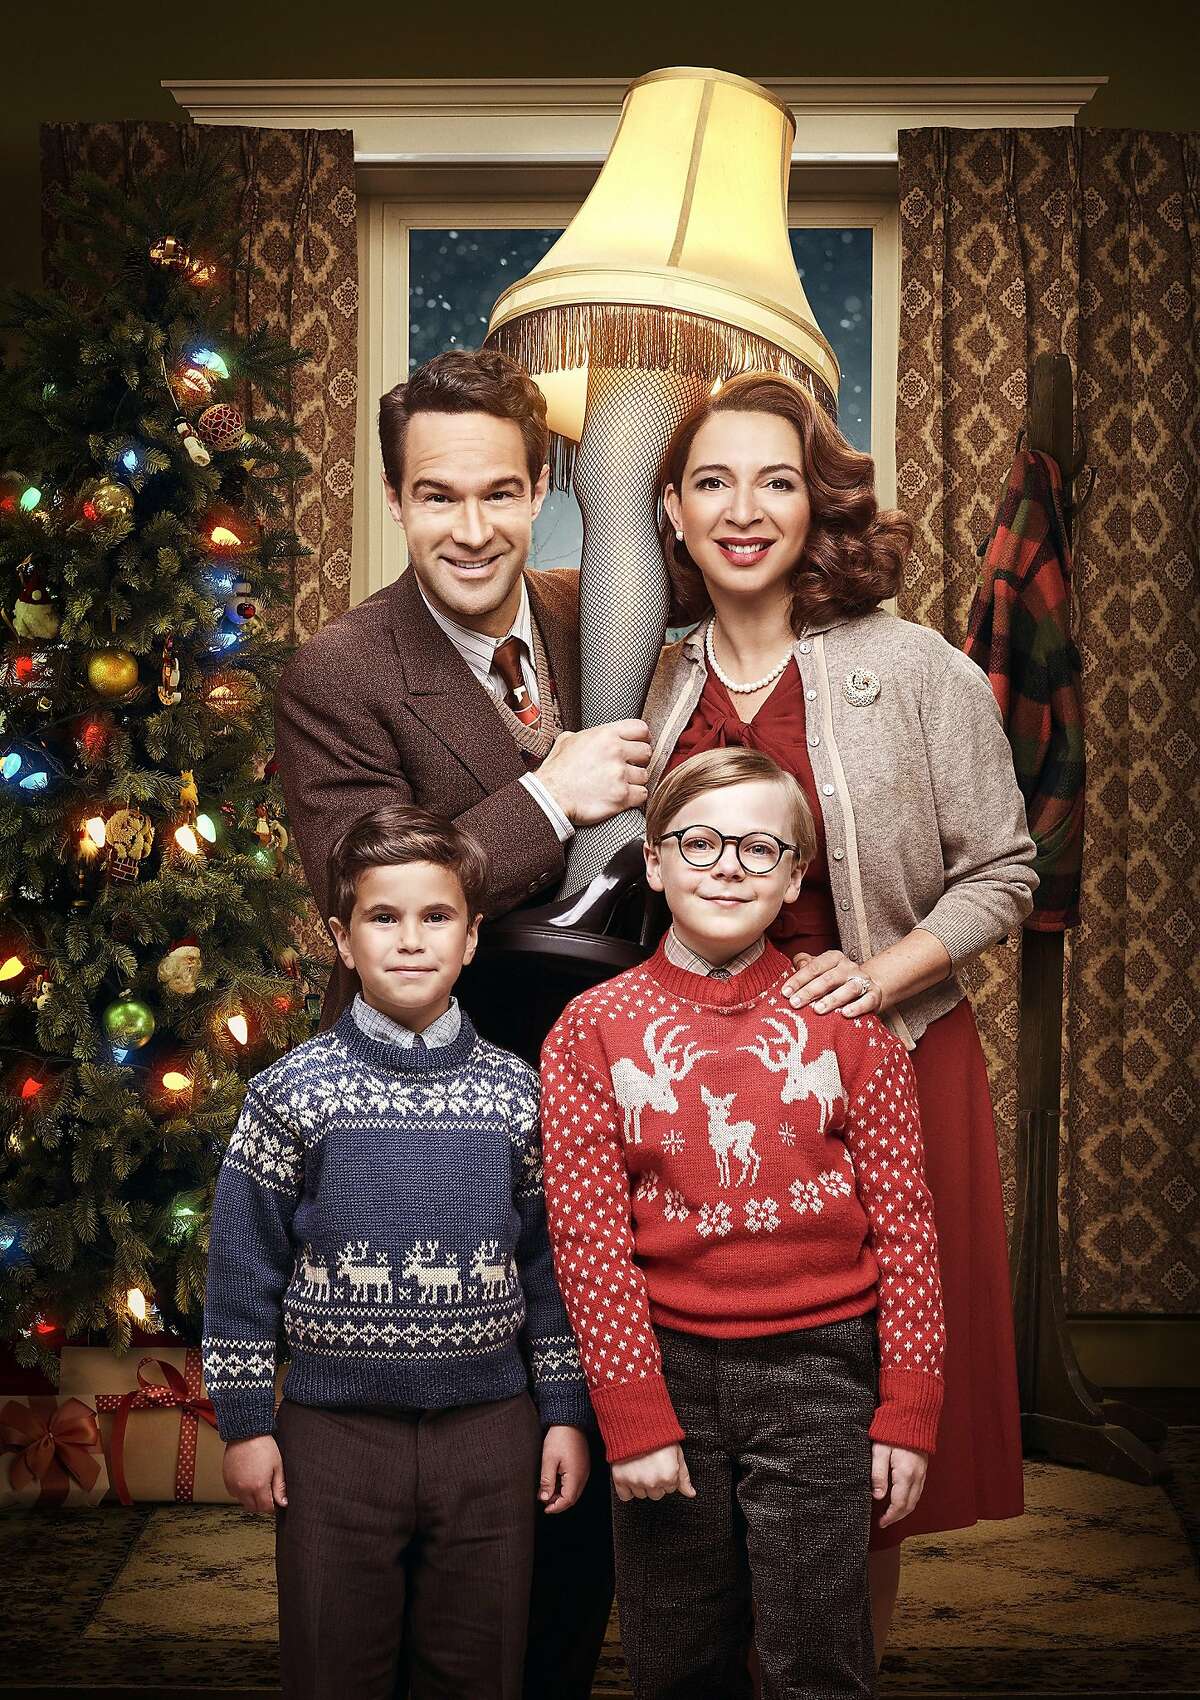 In 2017 "A Christmas Story Live!" aired on Fox. Matthew Broderick, Andy Walken, Maya Rudolph, Chris Diamantopoulos and Jane Krakowski all starred in the television special.